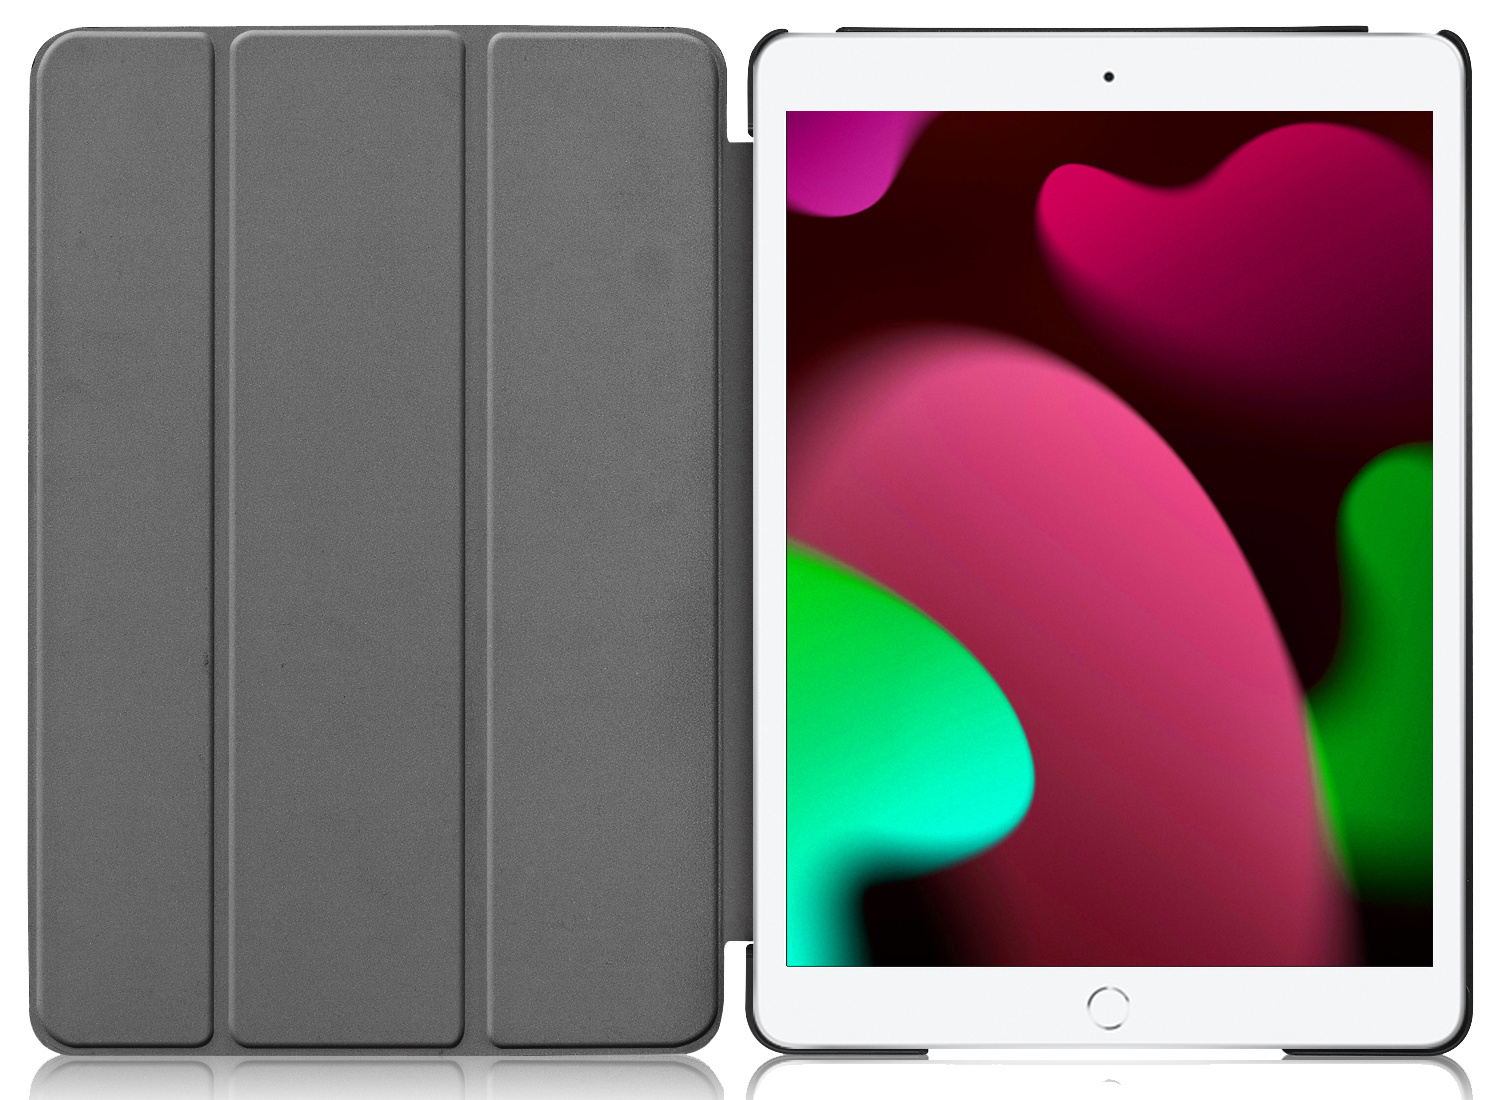 Nomfy iPad 10.2 2020 Hoesje Book Case Hoes - iPad 10.2 2020 Hoes Hardcover Case Hoesje - Goud